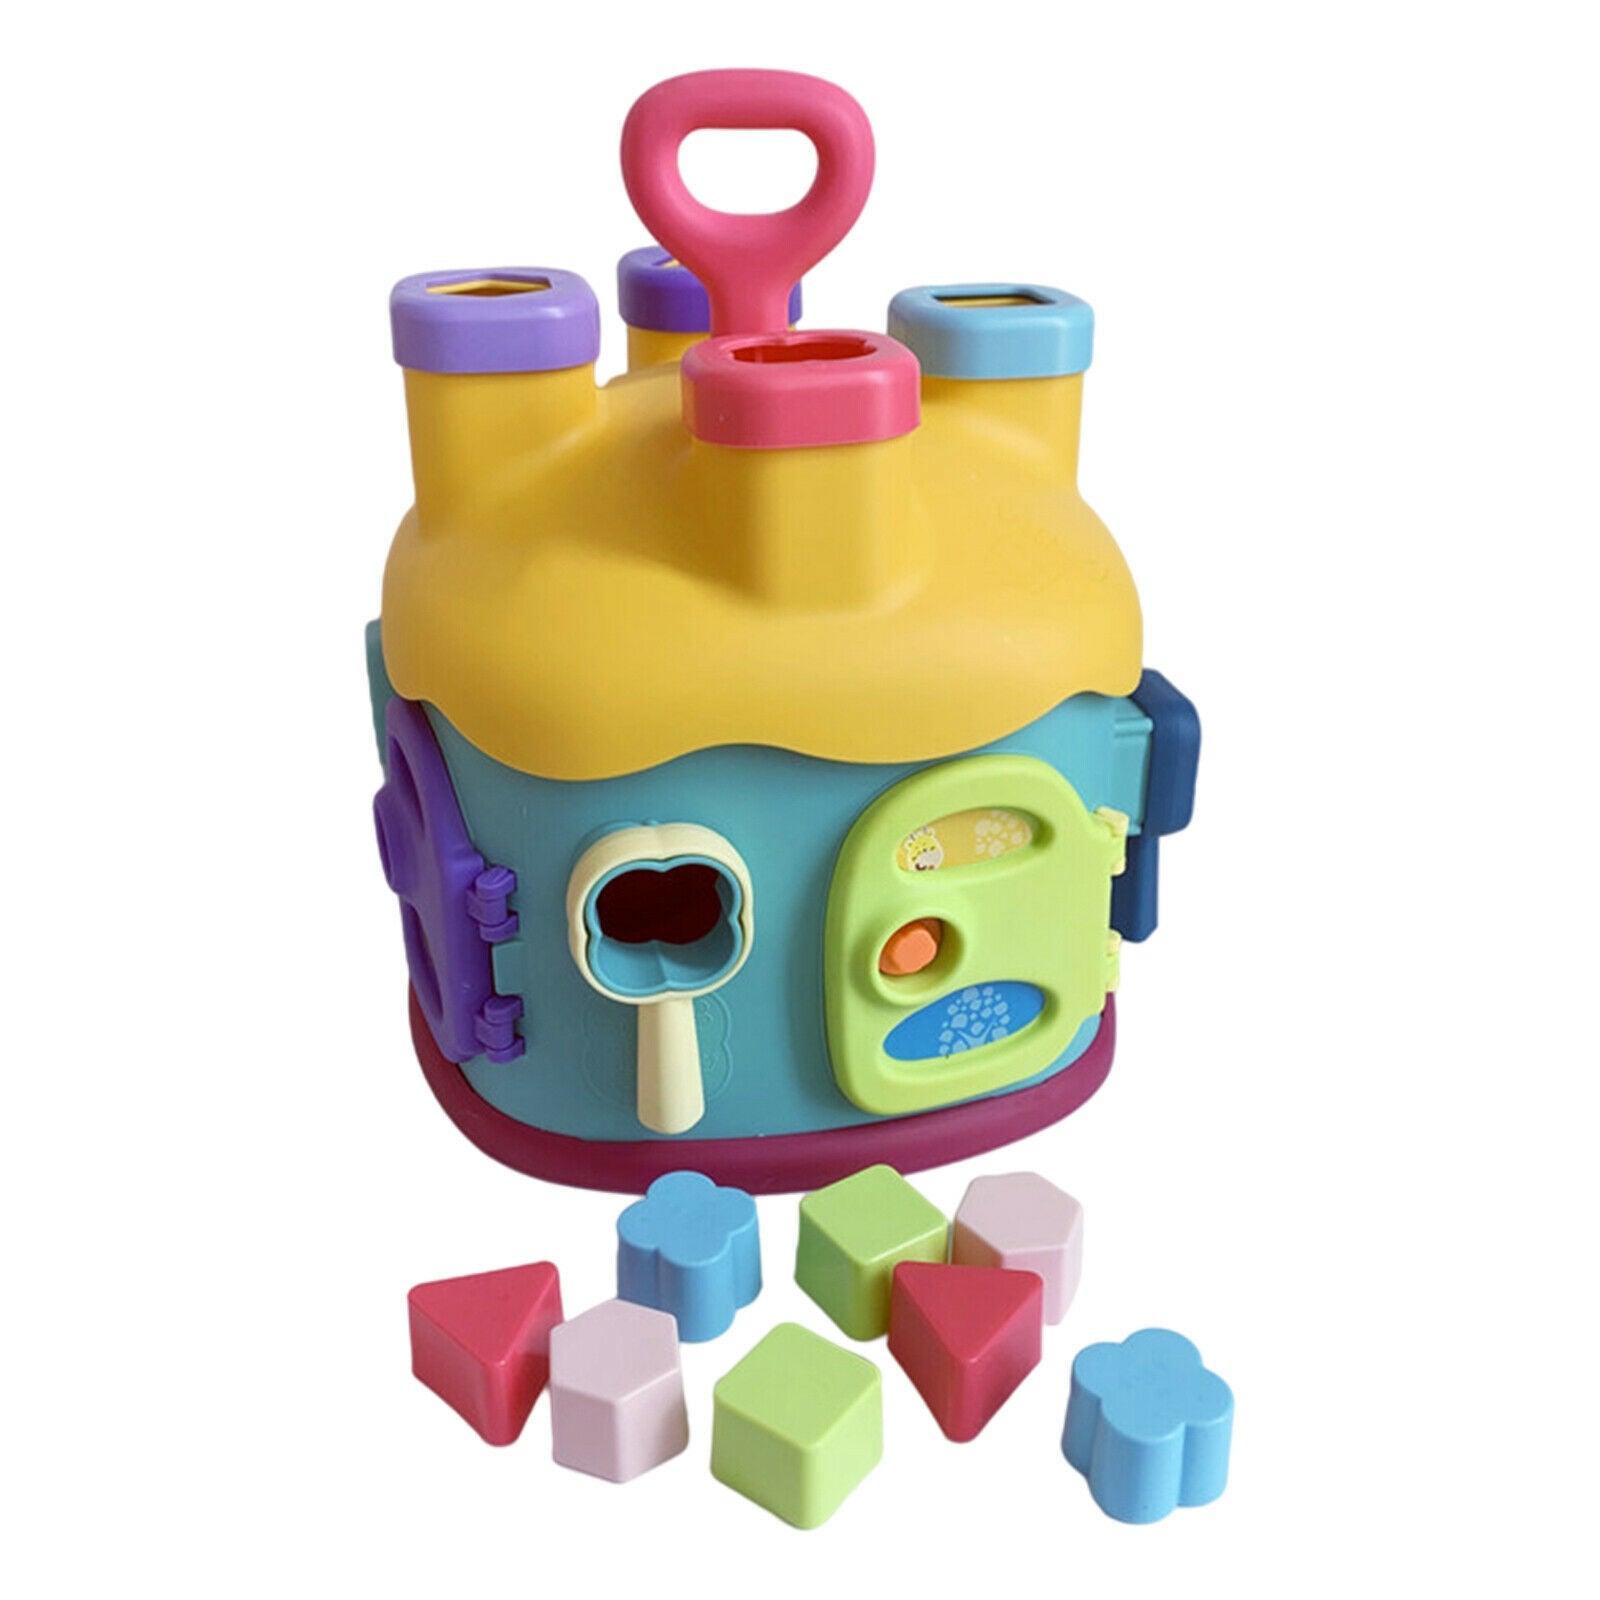 Children Colors Cognition Matching Plaything Geometrical Wisdom House Toys